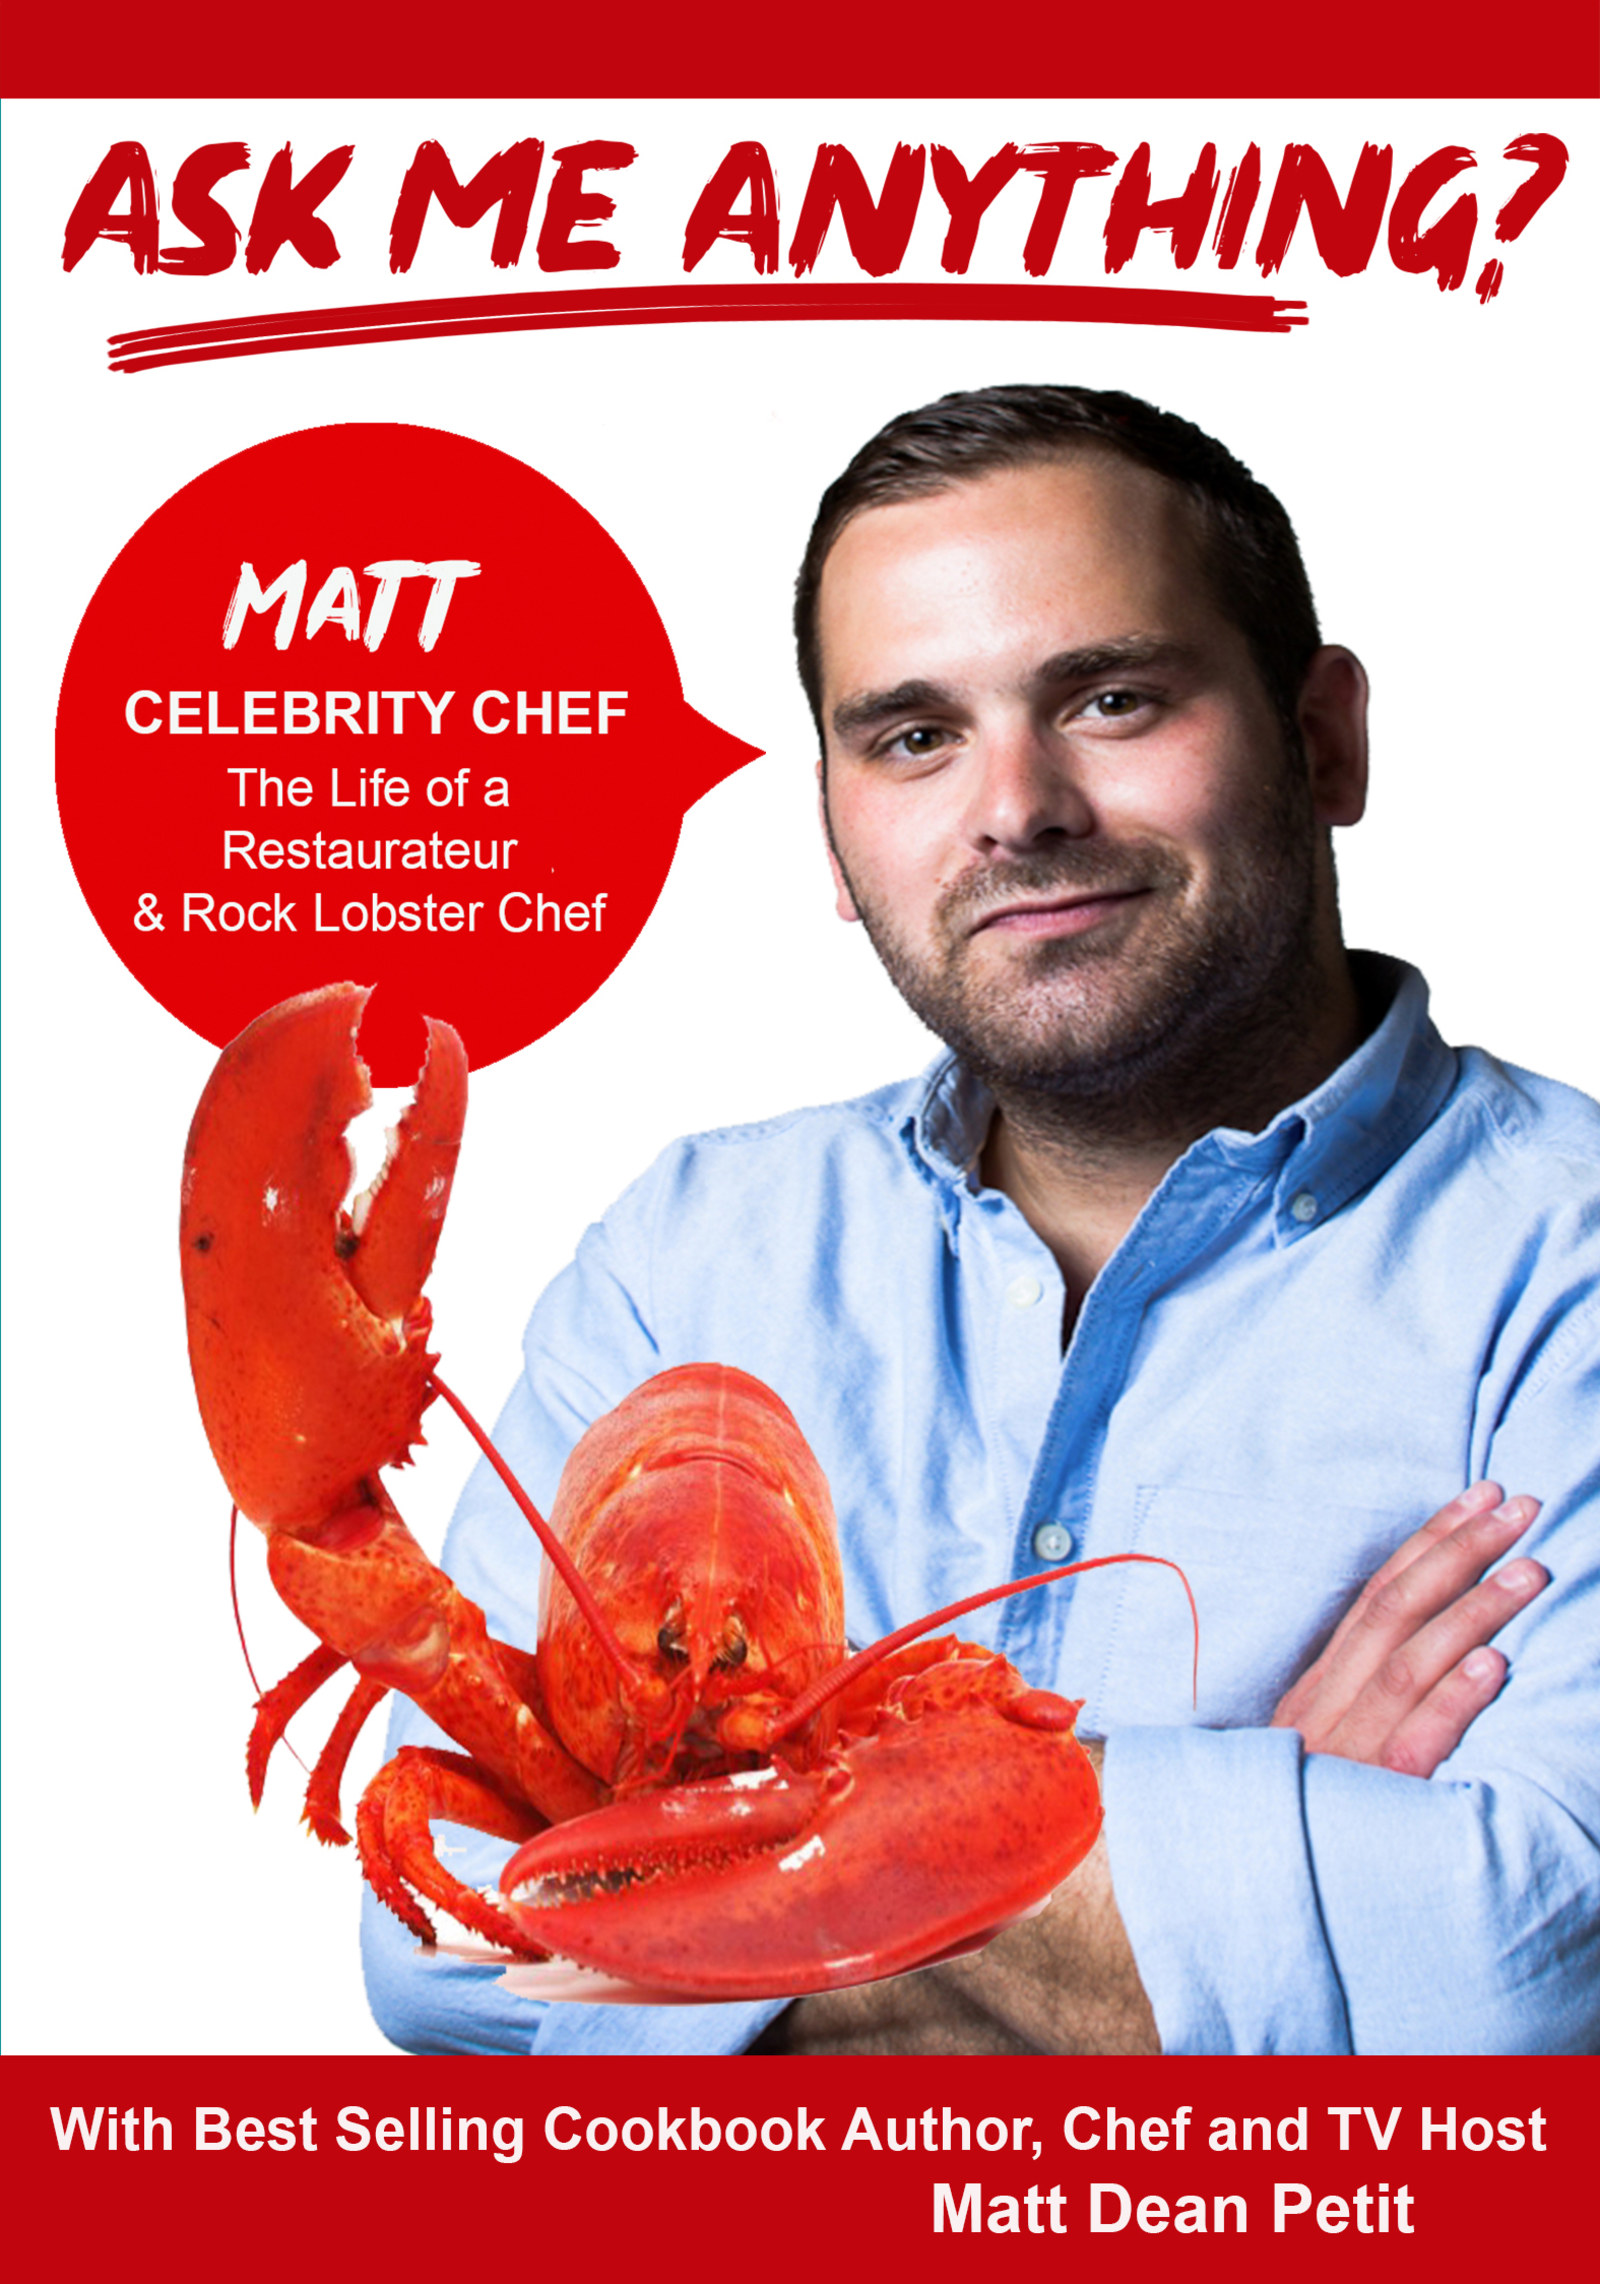 K4836 - Ask Me Anything about The Life of a Restaurateur & Rock Lobster Chef with Matt Dean Petit